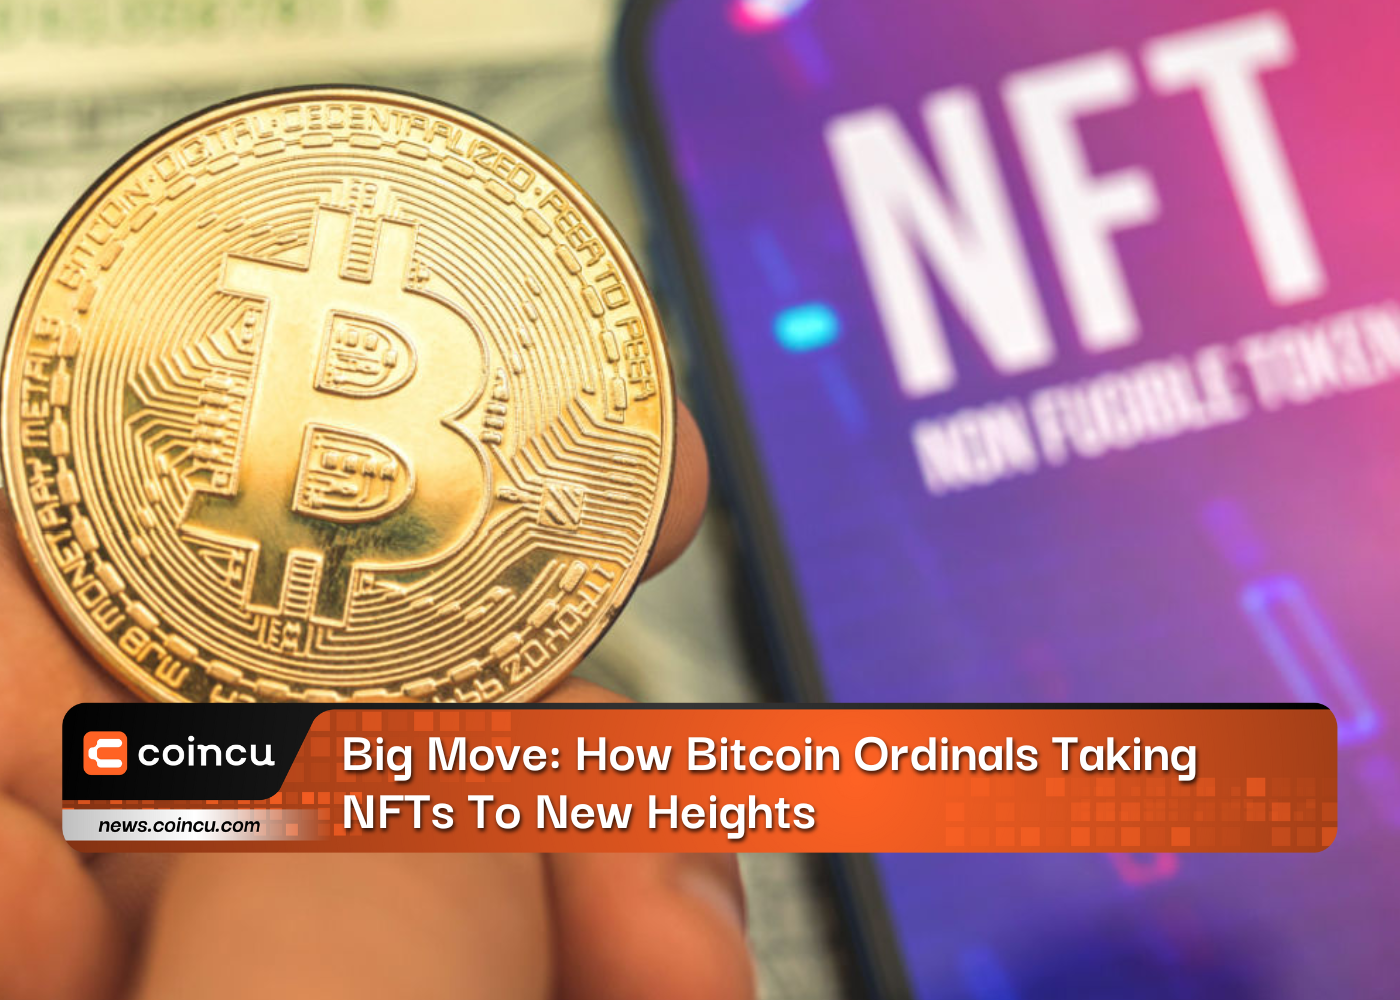 Big Move: How Bitcoin Ordinals Is Taking NFTs To New Heights